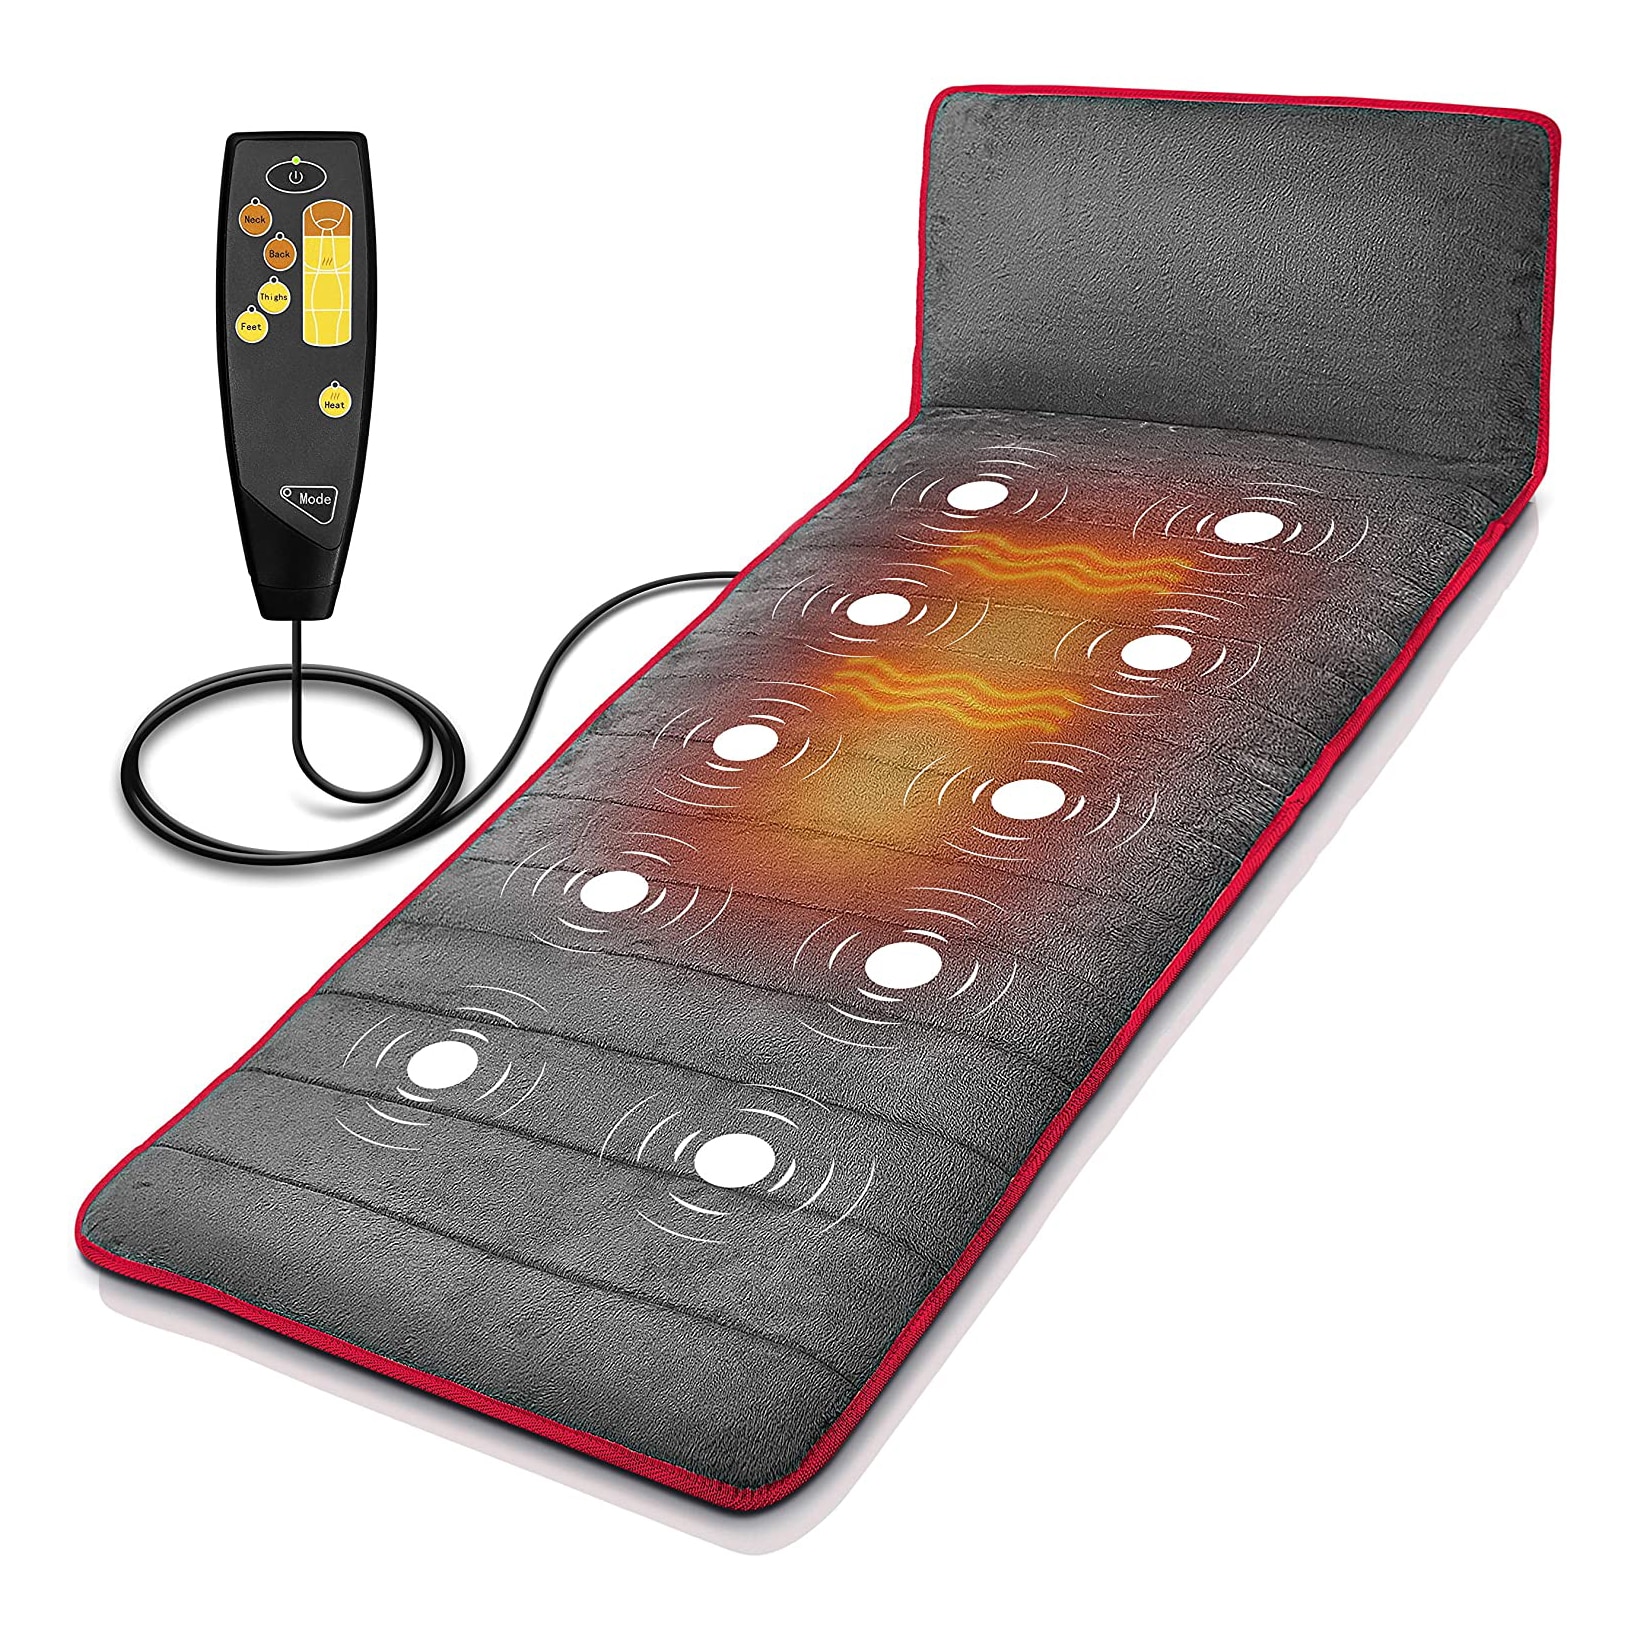 Top 10 Best Full Body Massage Mats In 2021 Reviews Buyer’s Guide